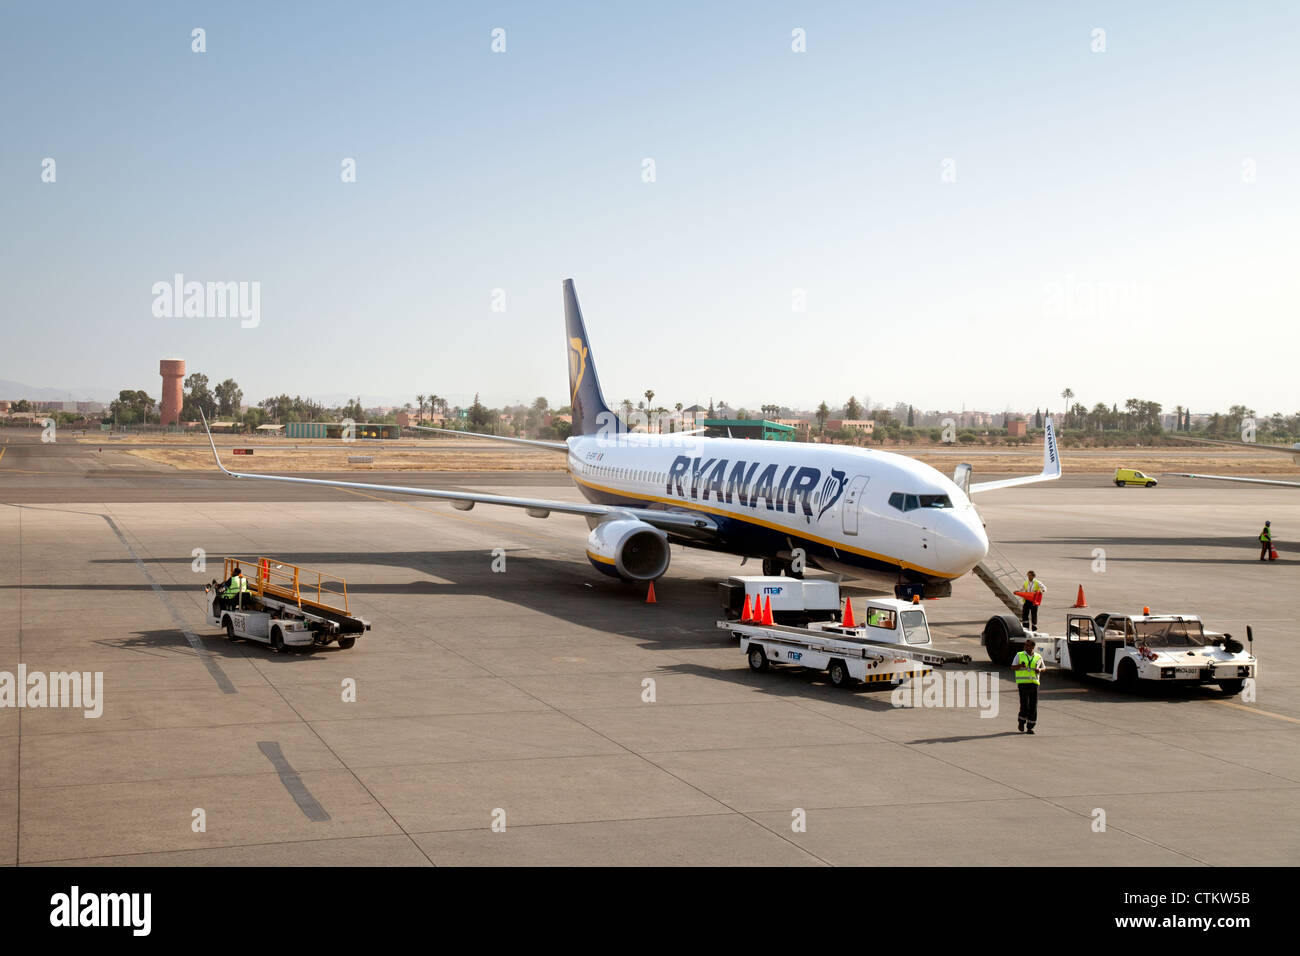 Ryanair plane on the tarmac at Marrakech airport, Morocco Africa Stock Photo